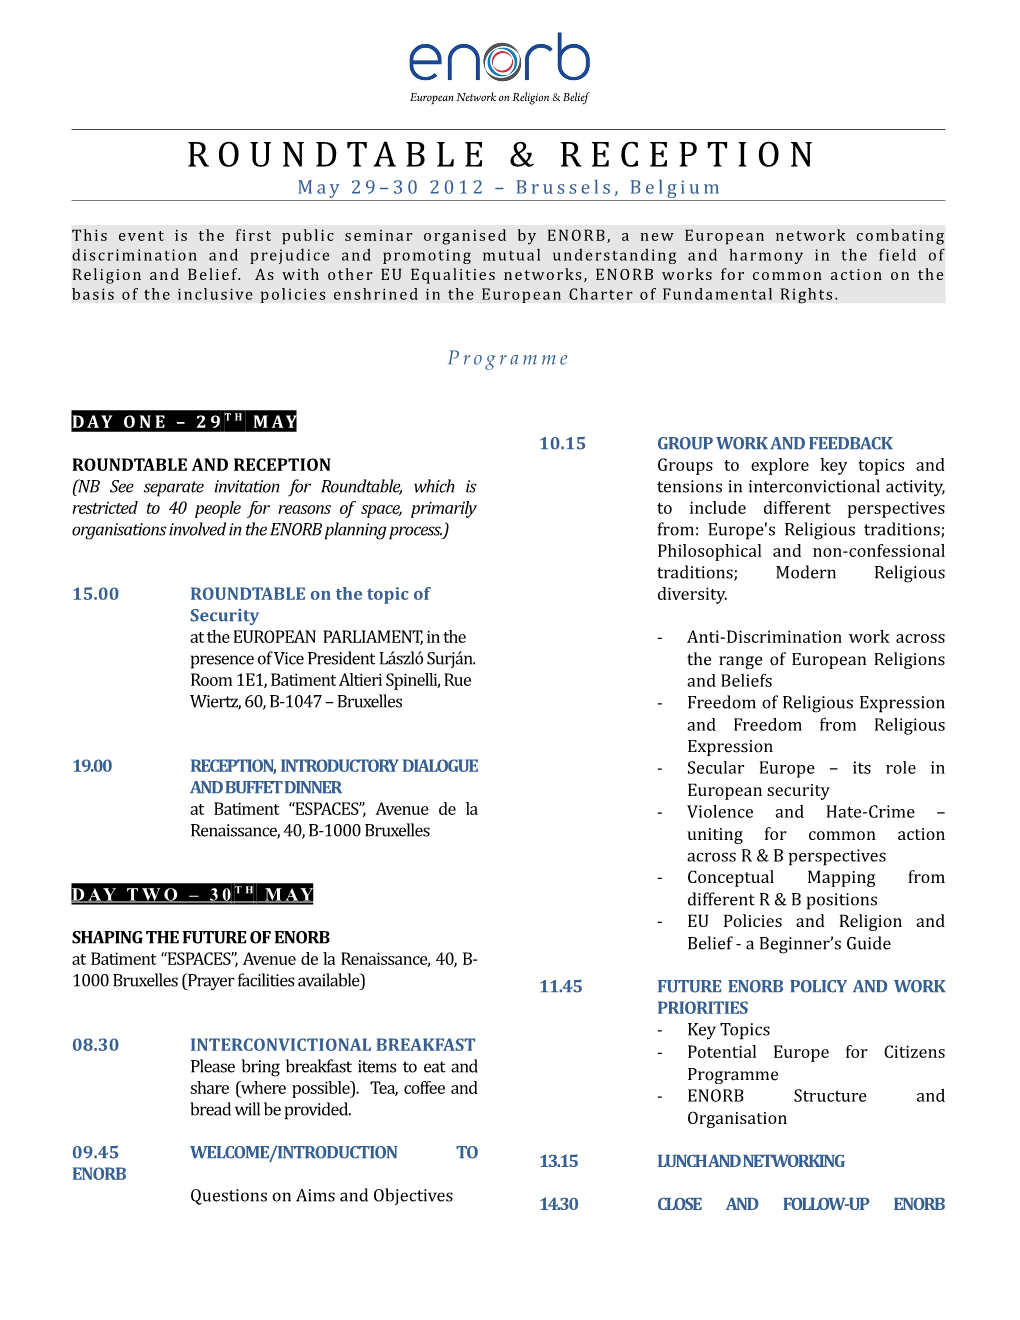 European Network on Religion and Belief - Seminar May 29 30 2012